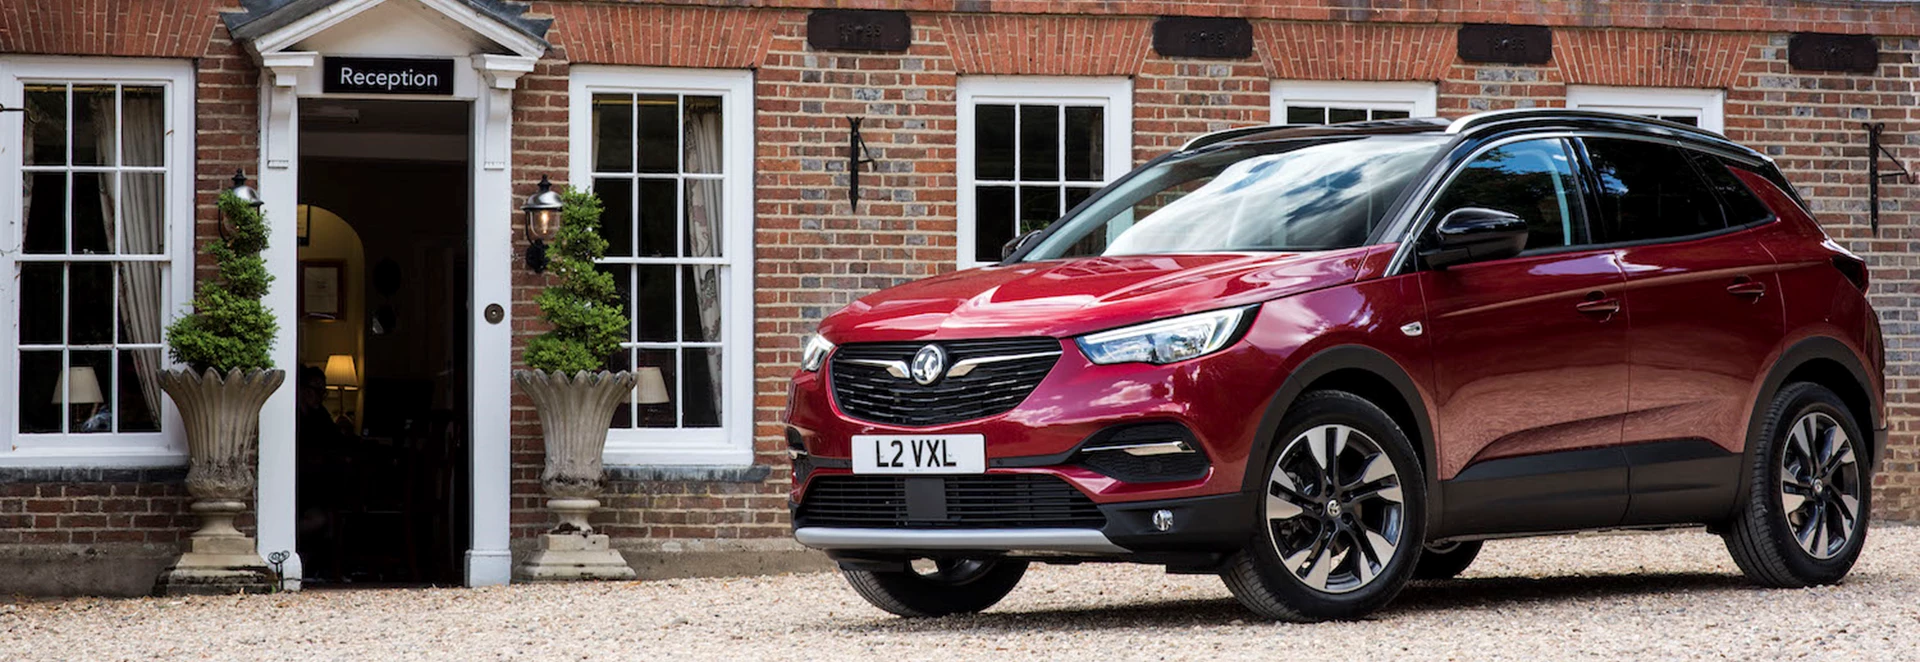 Vauxhall's EV Range: What's coming in 2019 